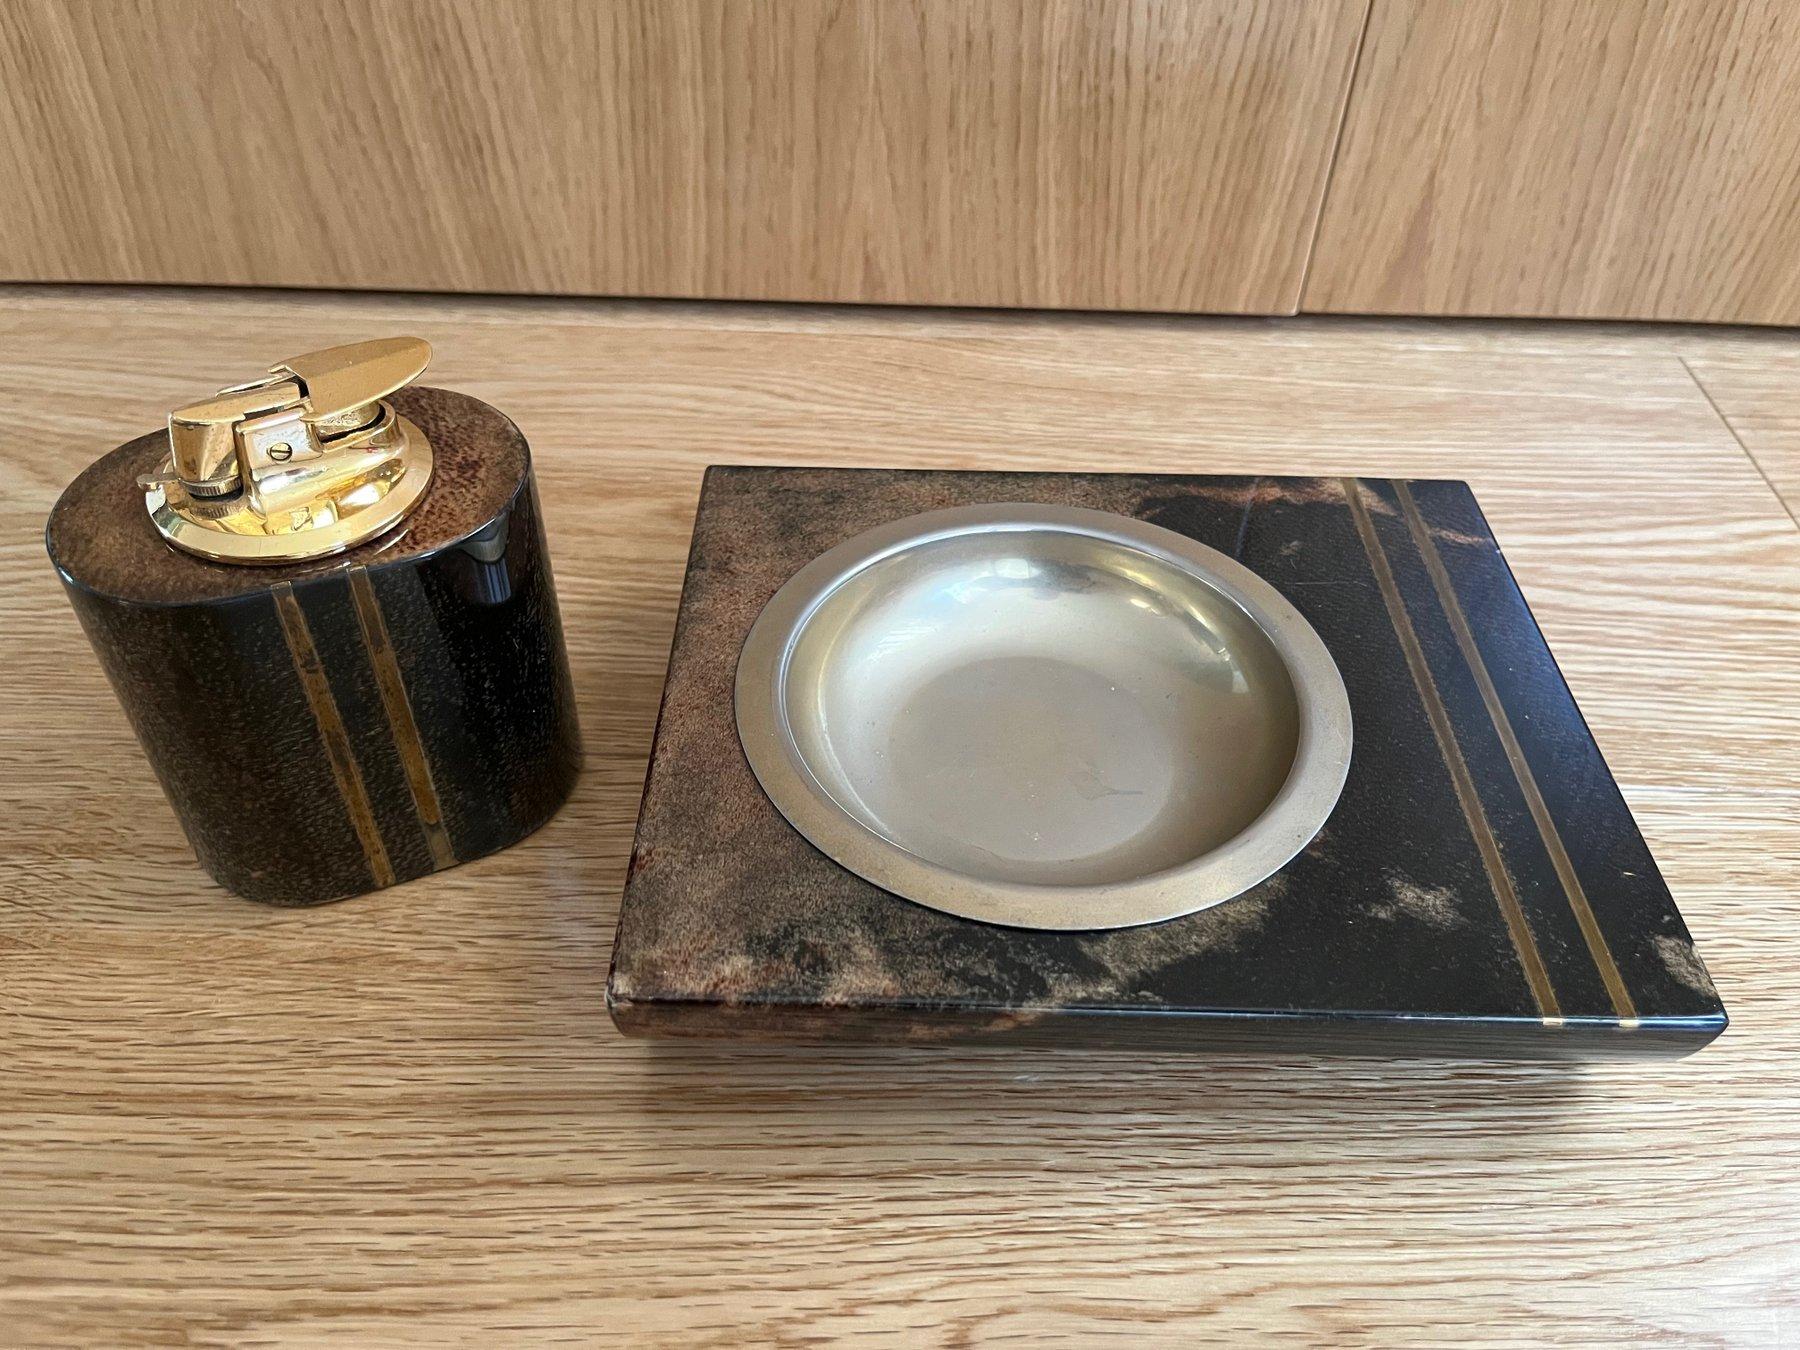 Indulge in the sophistication of this Aldo Tura ashtray lighter, an Italian masterpiece in parchment. Tura, celebrated for his luxurious designs, crafted this object with meticulous attention to detail, using exotic finishes like eggshells,